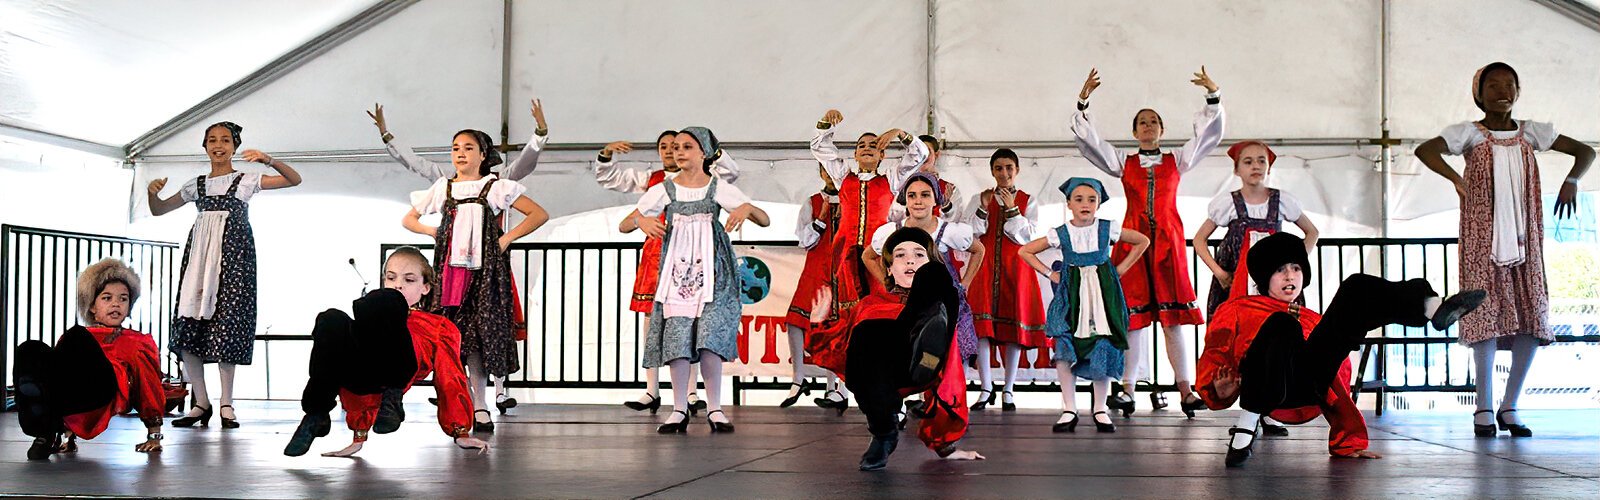 Young dancers from the St Pete Folk Ensemble perform a Russian dance on stage.